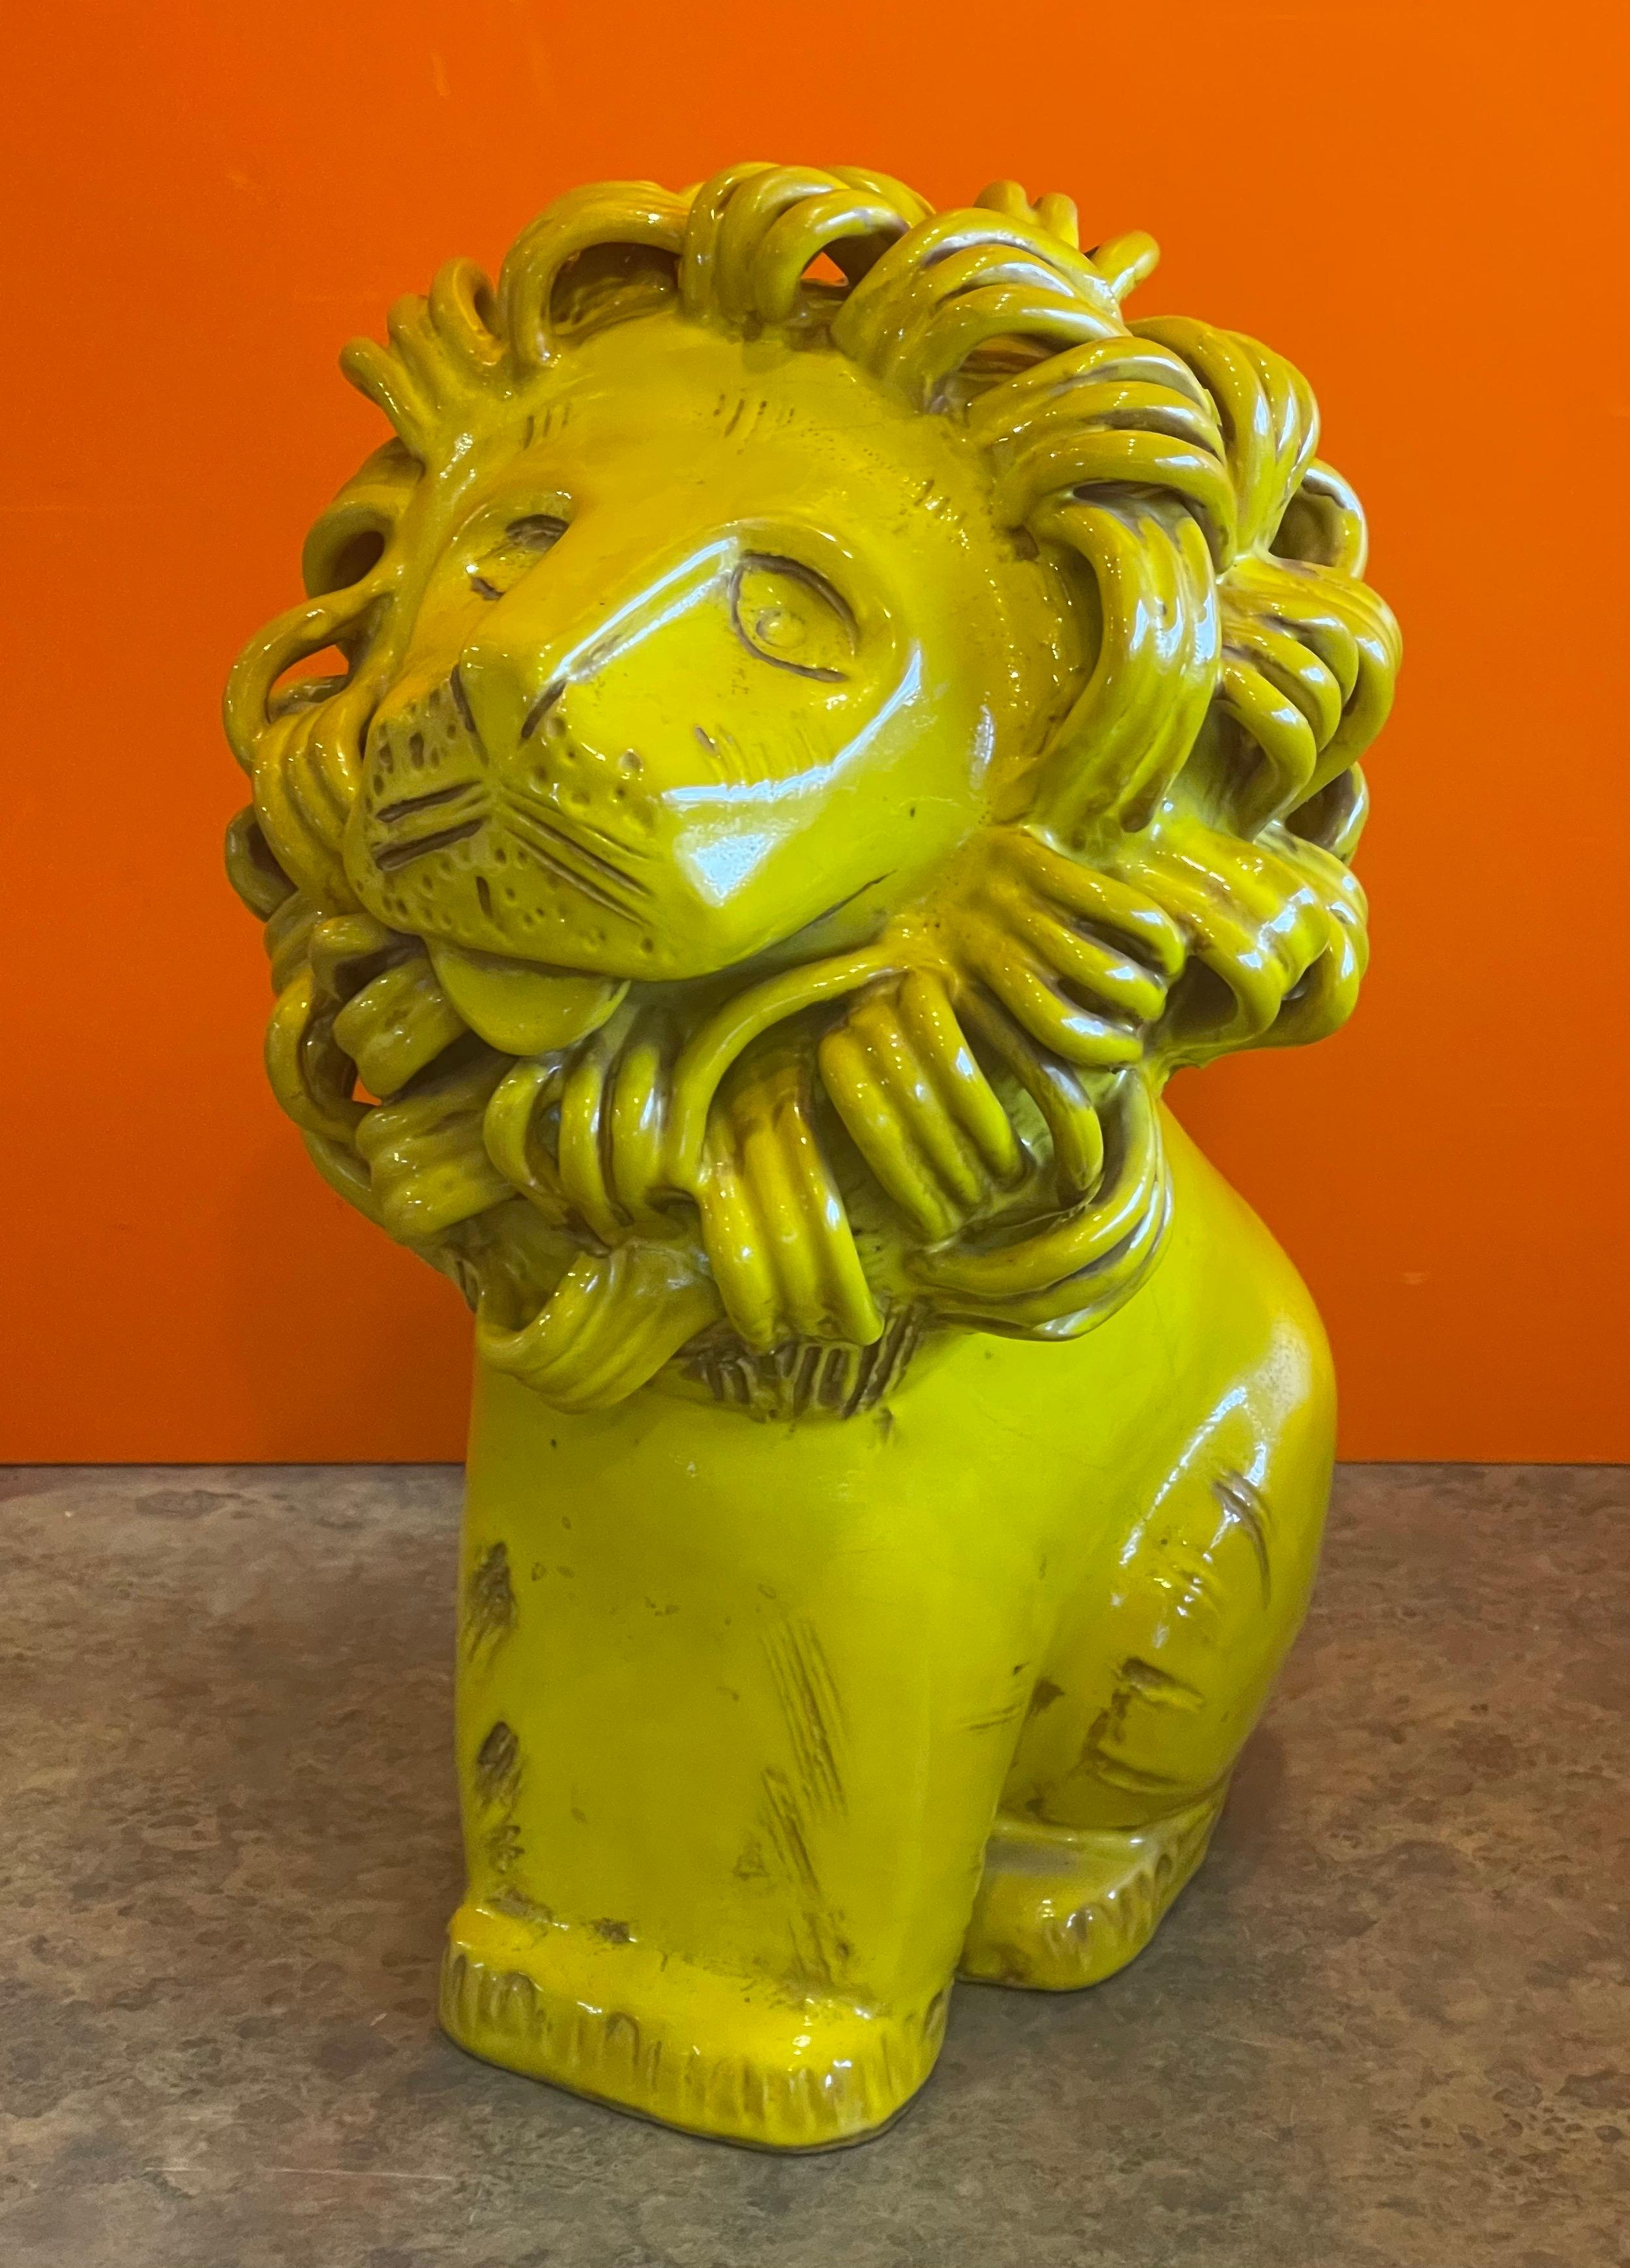 Vintage ceramiche / pottery lion sculpture by Aldo Londi for Bitossi Raymor, circa 1960s. The piece is in very good vintage condition with a great color, texture and intricate detail; it would make a fantastic addition and center piece to any